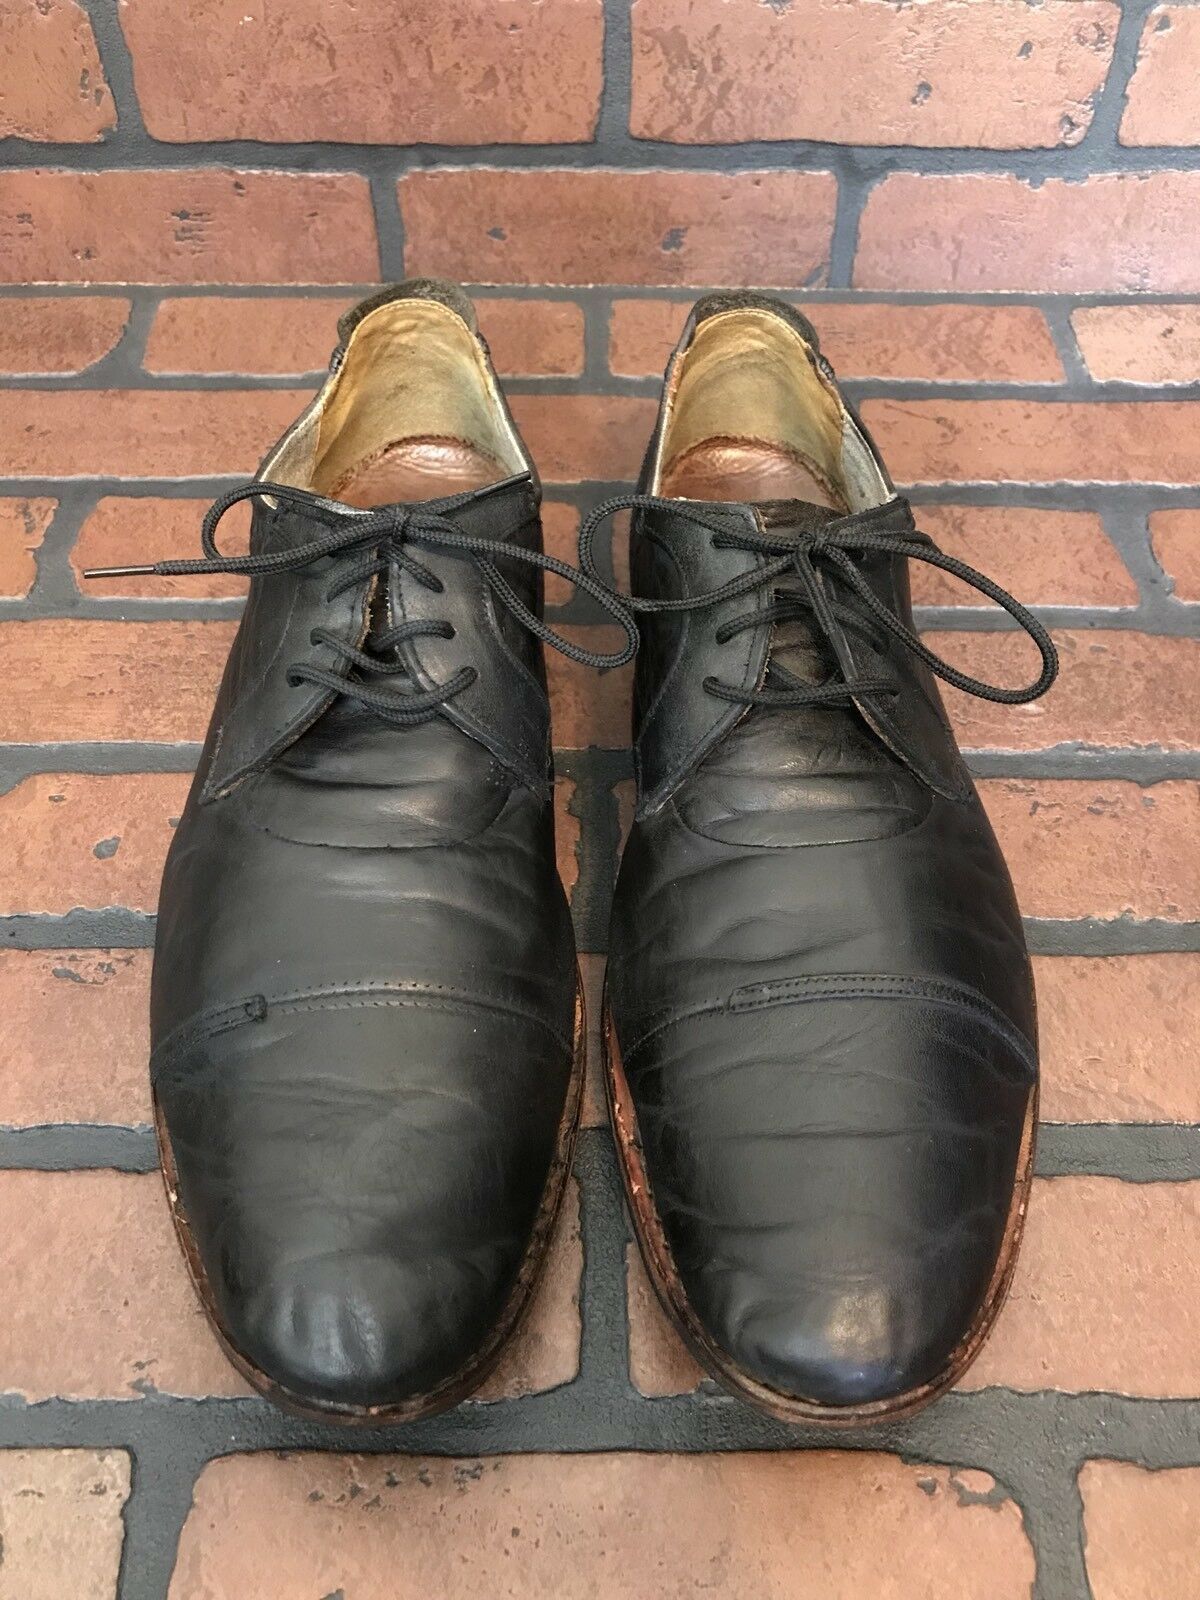 Timberland Wodehouse Cap Toe Oxfords Brown Leather Size 13 - $54.95